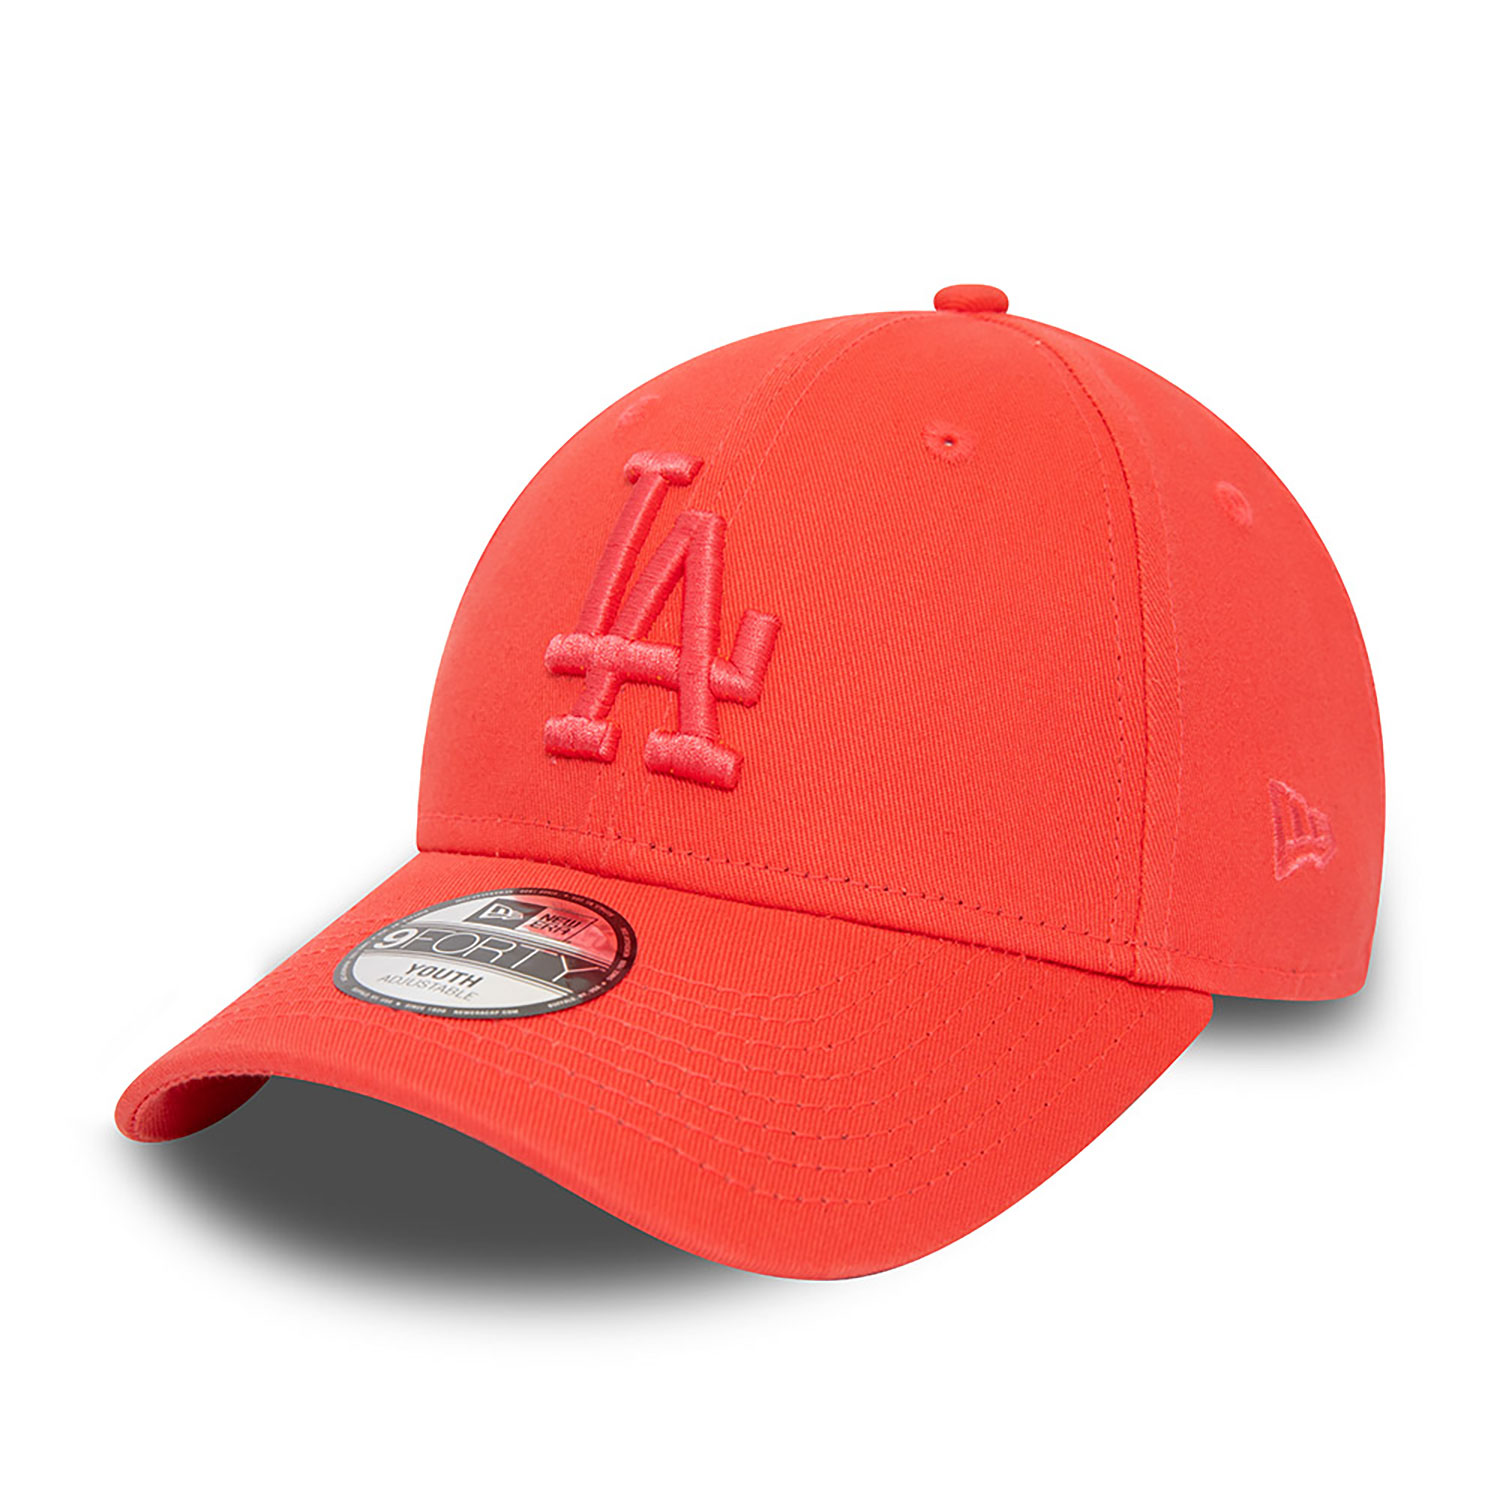 LA Dodgers Youth League Essential Red 9FORTY Adjustable Cap